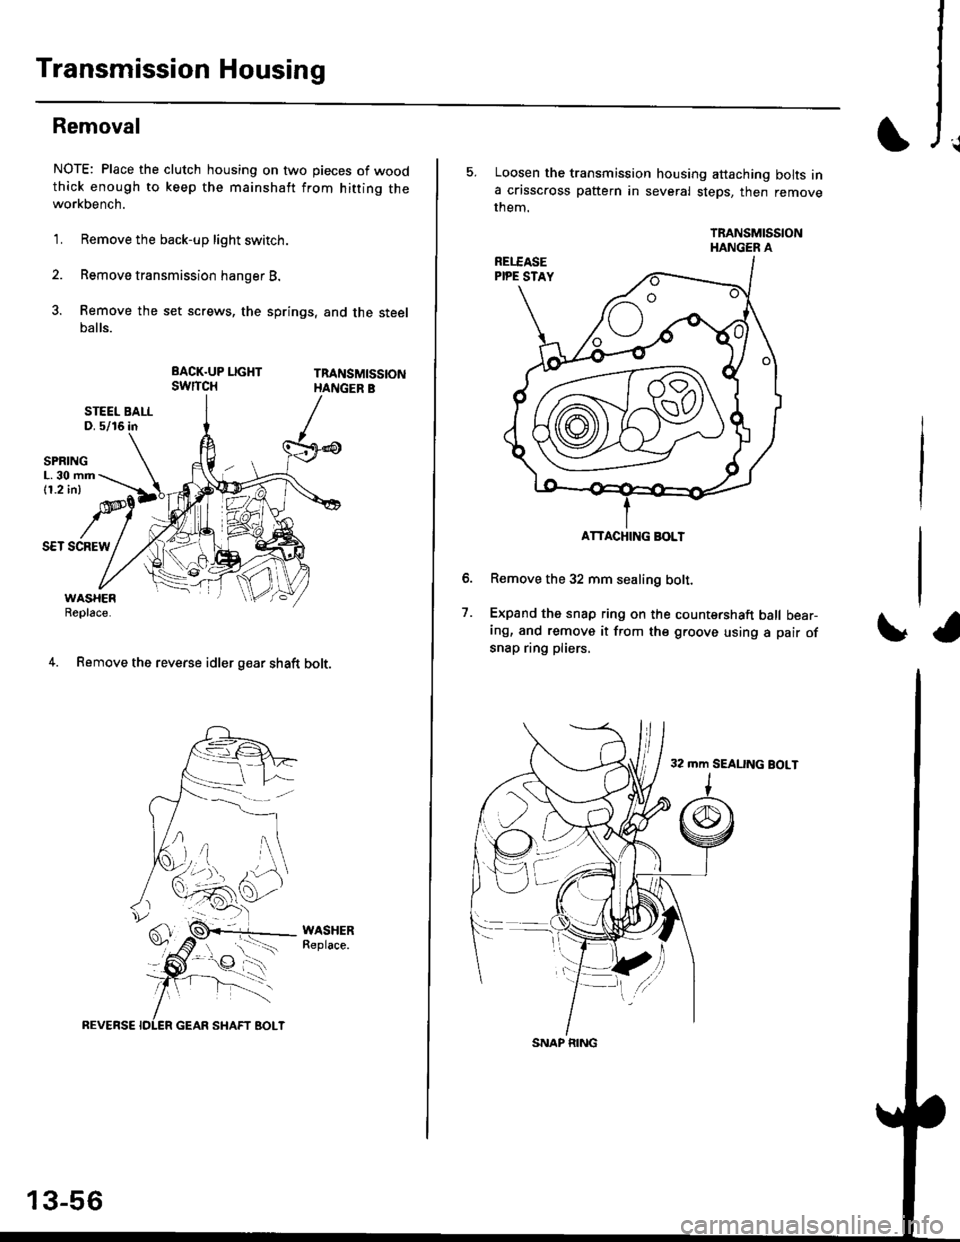 HONDA CIVIC 1996 6.G Repair Manual Transmission Housing
Removal
NOTE: Place the clutch housing on two pieces of wood
thick enough to keep the mainshaft from hitting theworkbench.
1. Remove the back-up light switch.
2. Remove transmiss